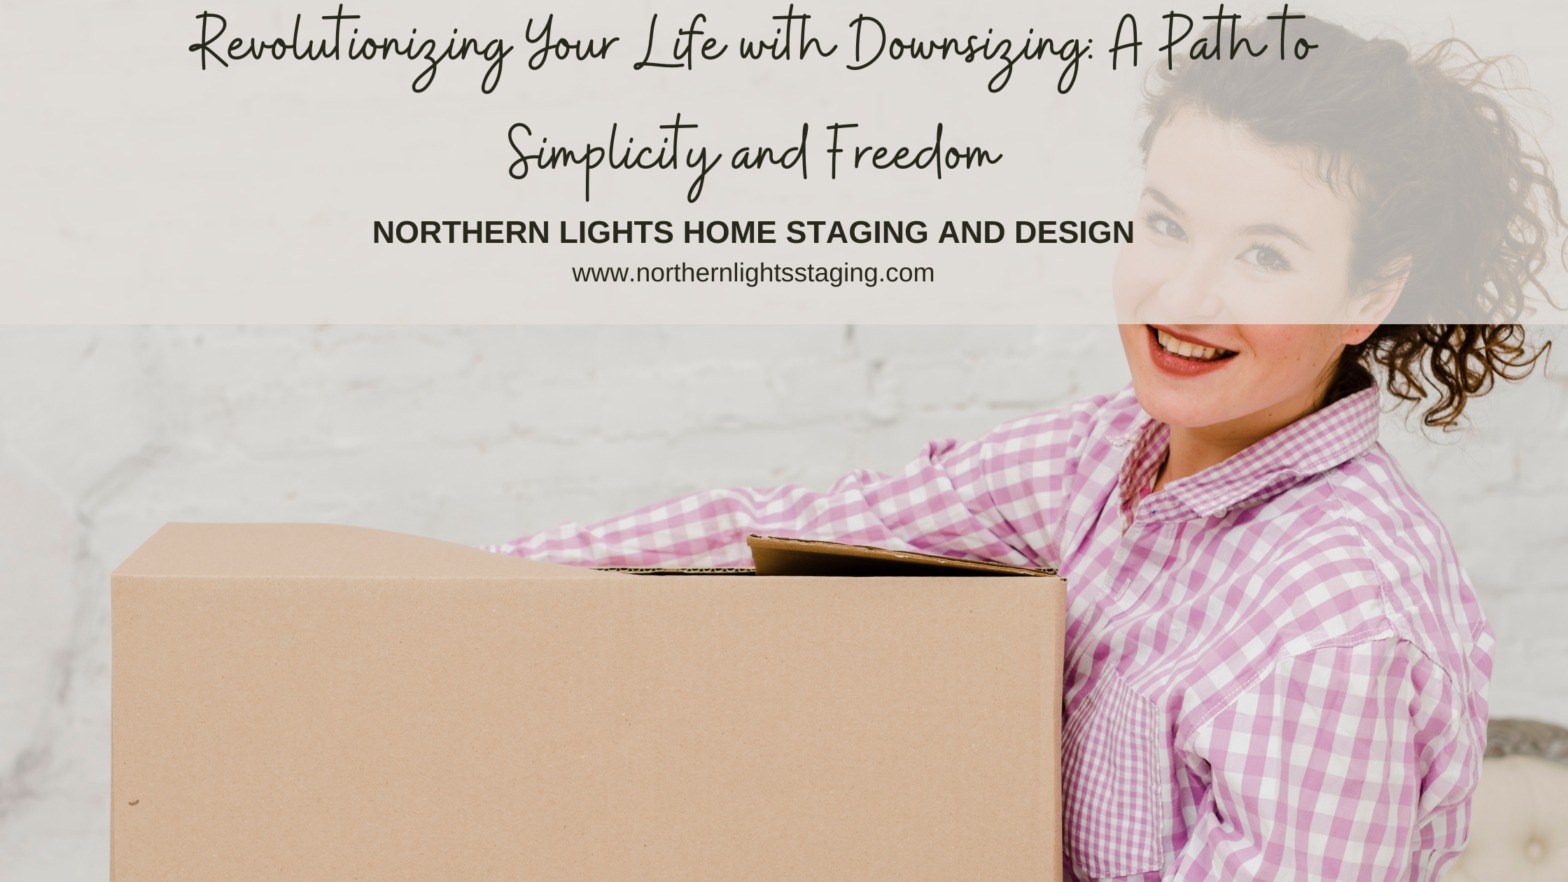 Revolutionizing Your Life with Downsizing: A Path to Simplicity and Freedom